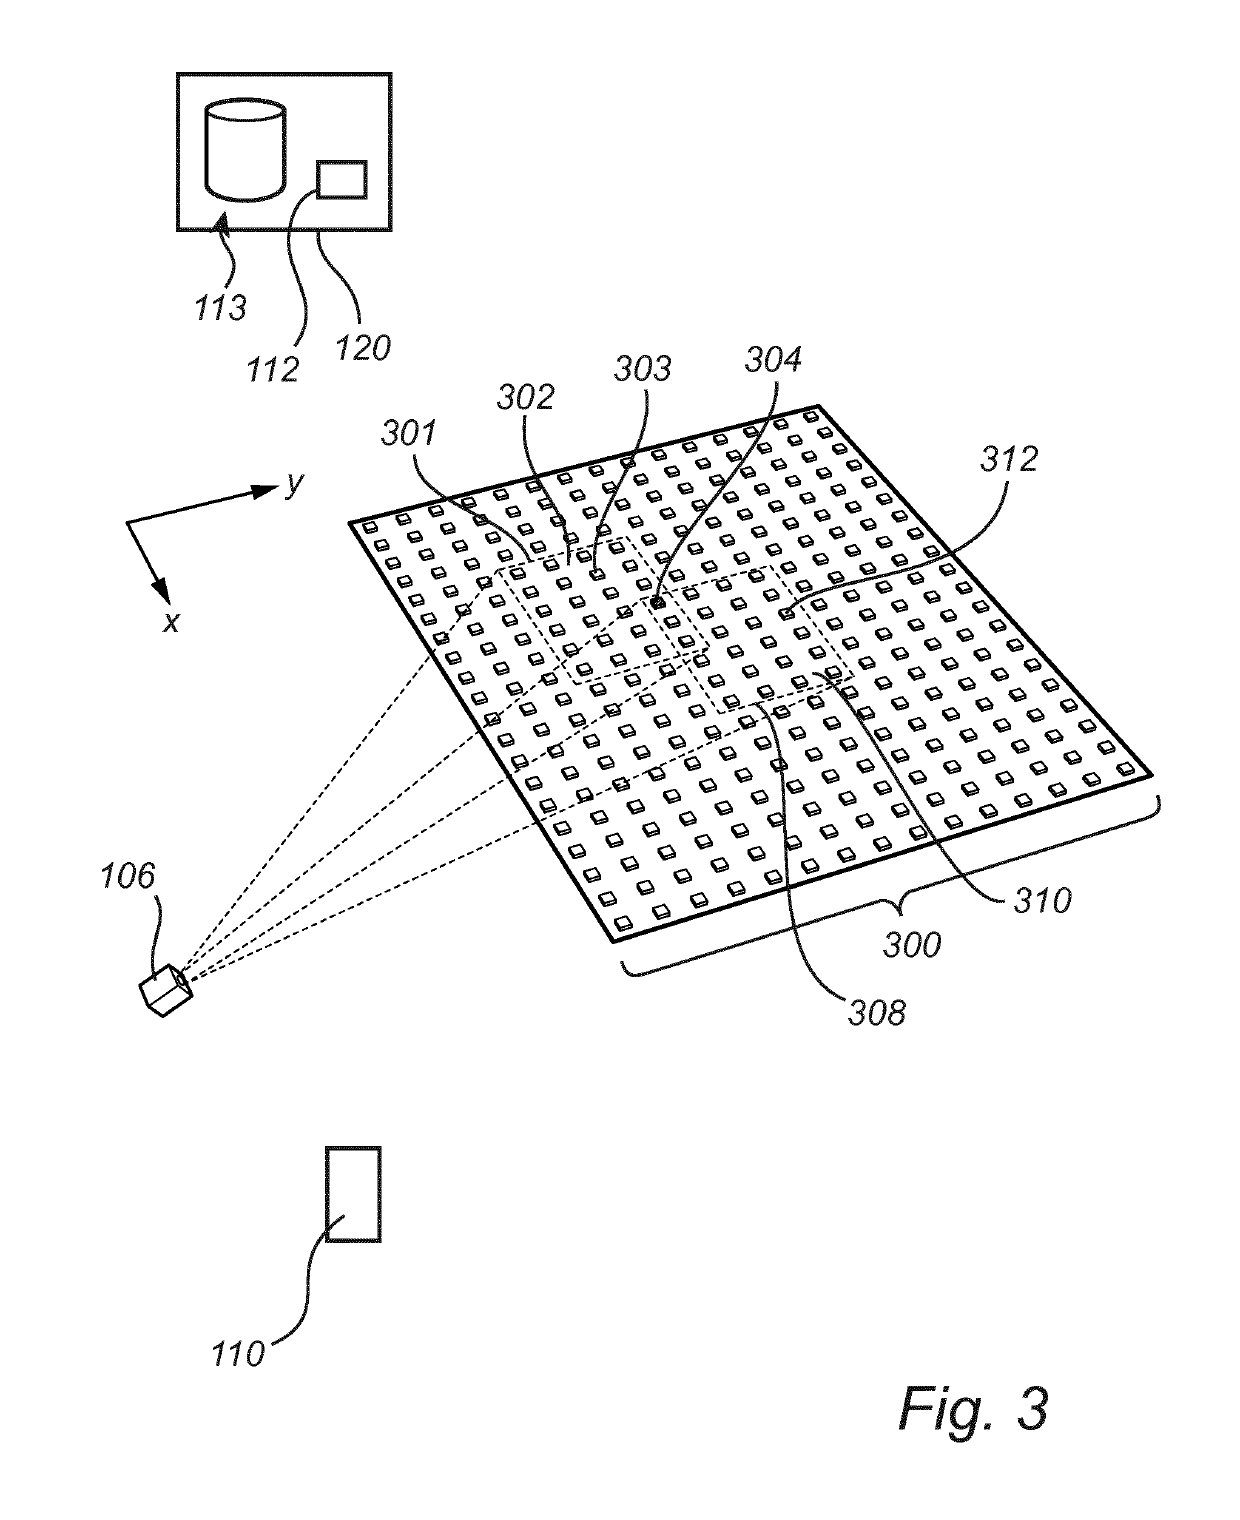 Method for automatic positioning of lamps in a greenhouse environment